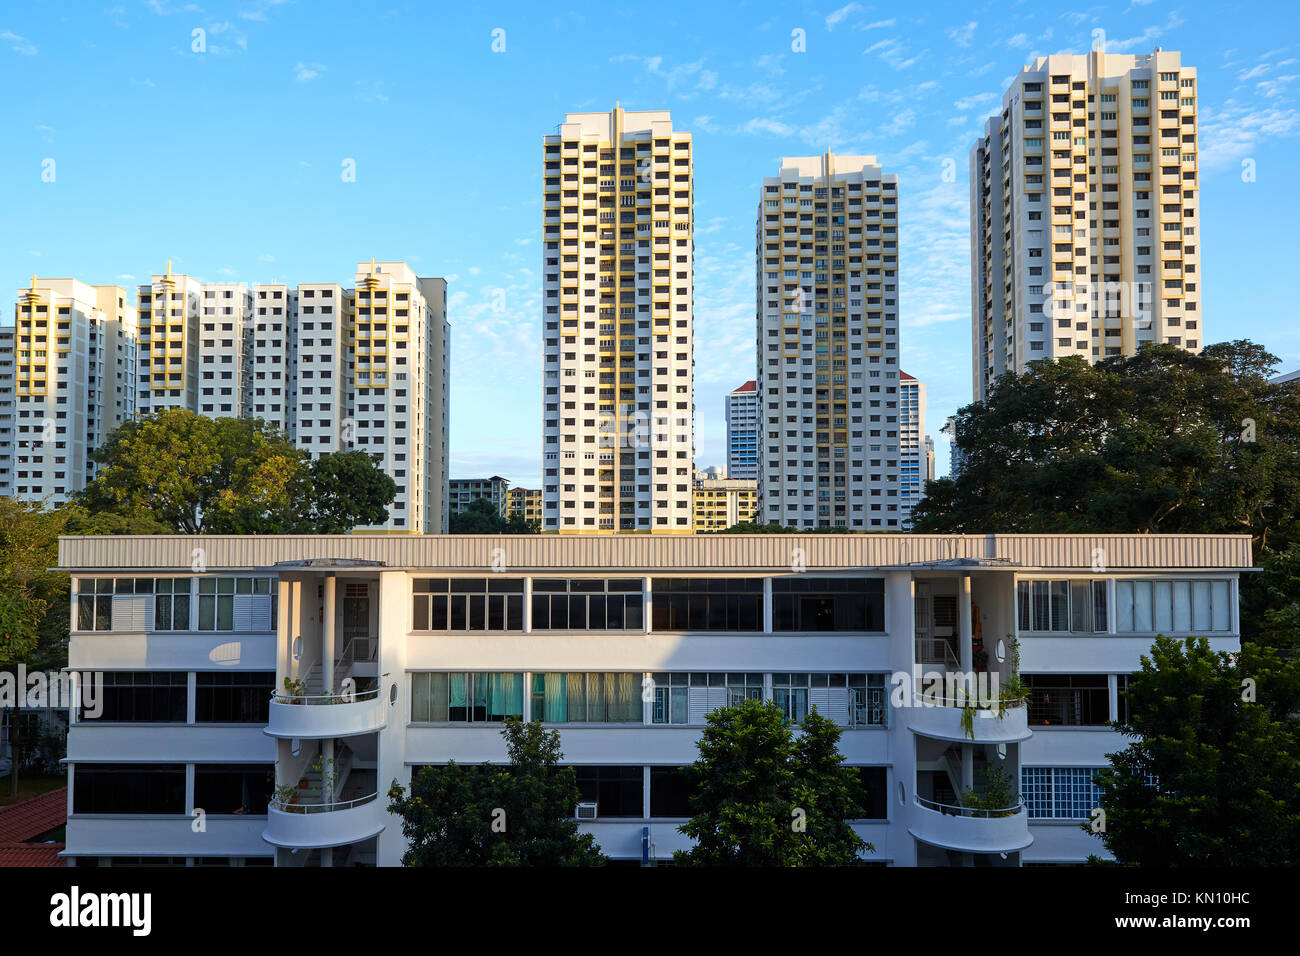 Contrasting Low Rise And High Rise Residental Housing In Tiong Bahru, Singapore. Stock Photo